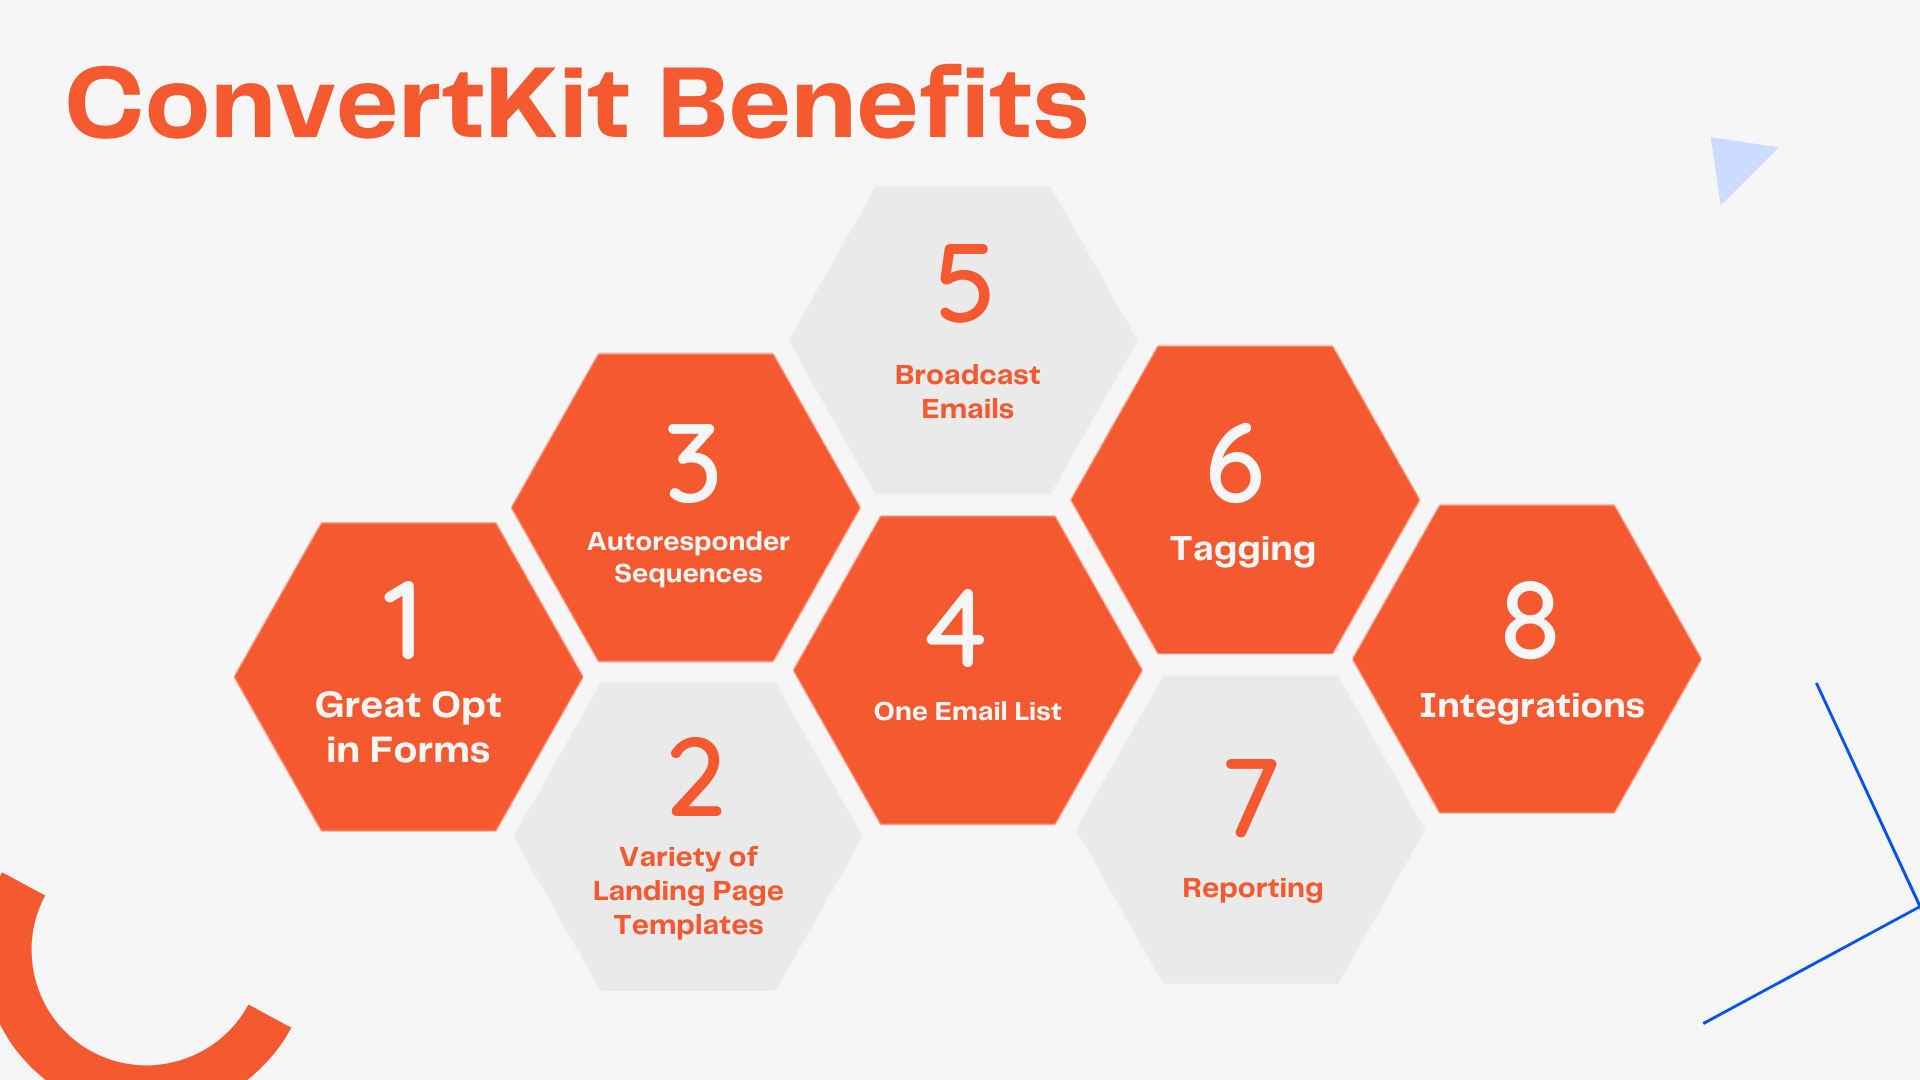 CovertKit Benefits Infographic (1. Great Opt in Forms, 2. Variety of Landing Page Templates 3. Autoresponder Sequences 4. One List 5. Broadcast Emails 6. Tagging 7. Reporting 8. Integrations